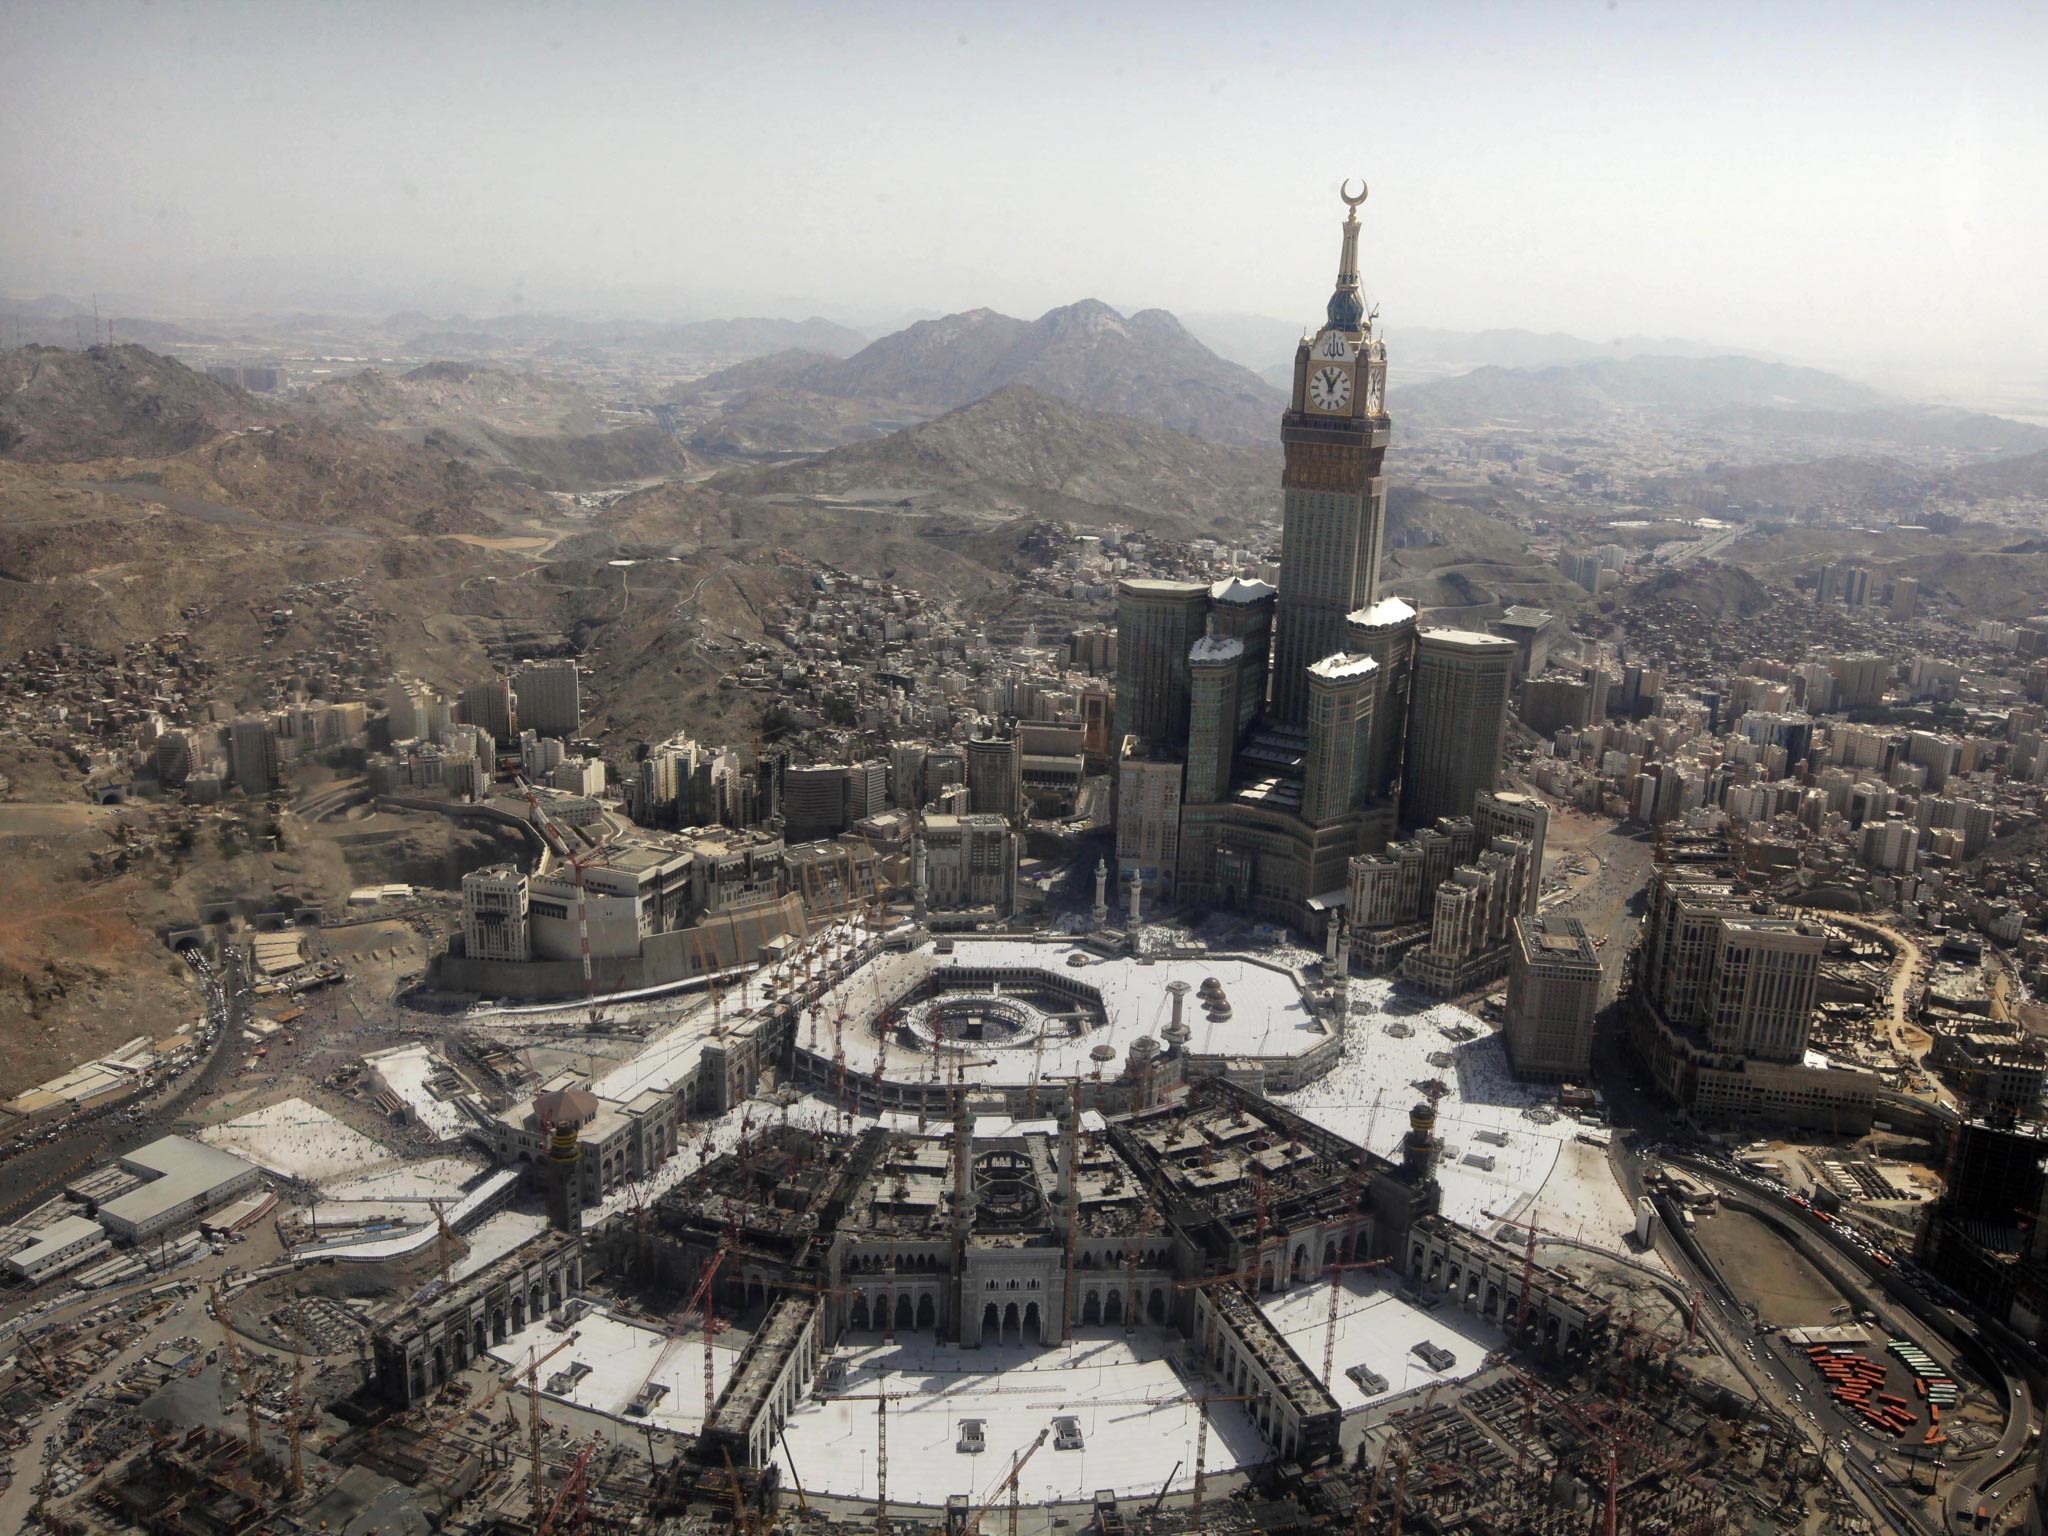 The woman was publicly beheaded in Mecca